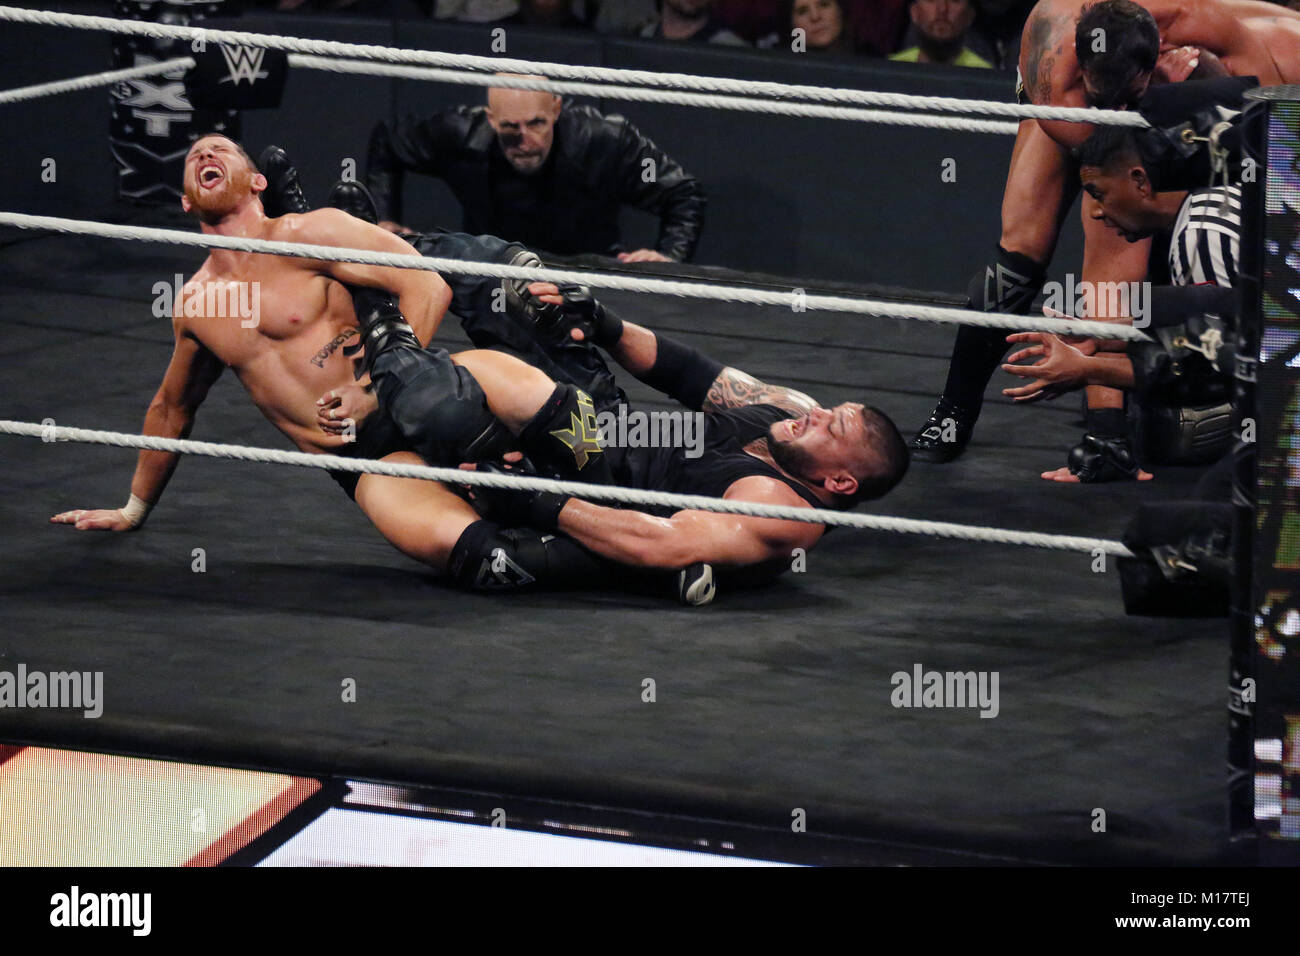 Philadelphia, PA, USA. 27th Jan, 2018. ERA wins match at WWE NXT Take Over at Wells Fargo Center in Philadelphia, Pa on January 27, 2018 Credit: Star Shooter/Media Punch/Alamy Live News Stock Photo